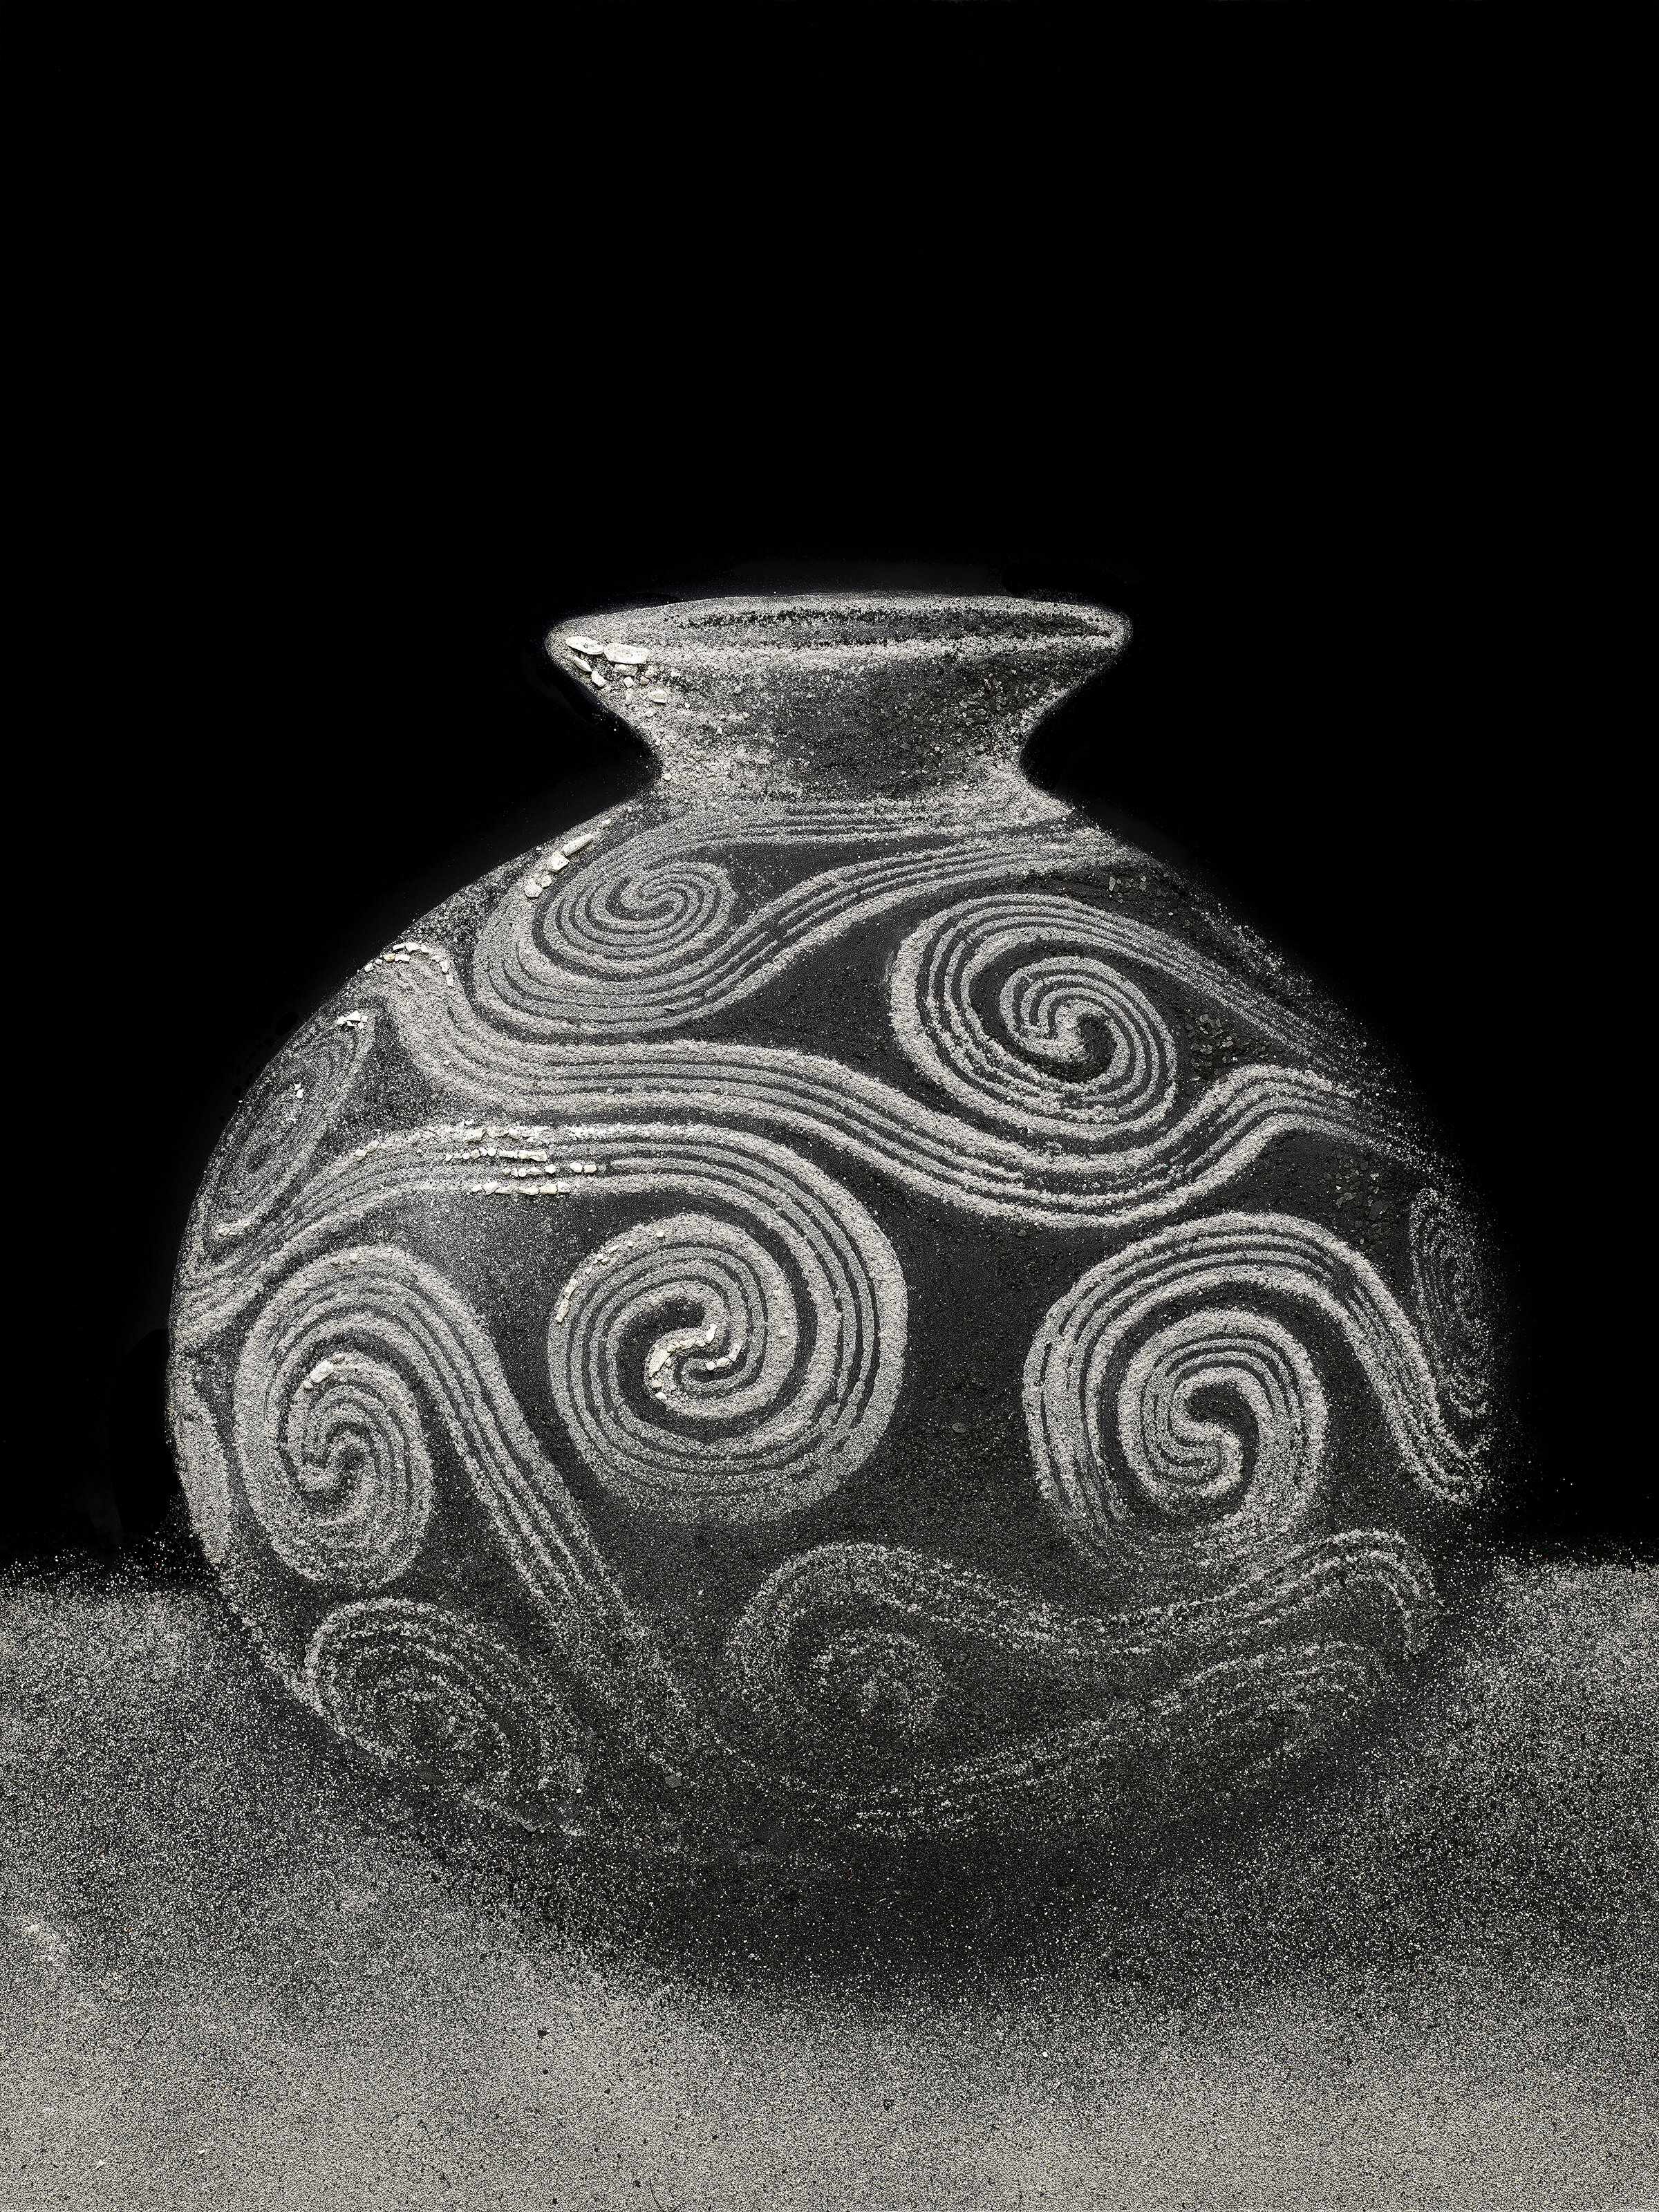 Marajoara Vase, 400-1400 A.D., Northern Brazil, Museum of Ashes, 2019